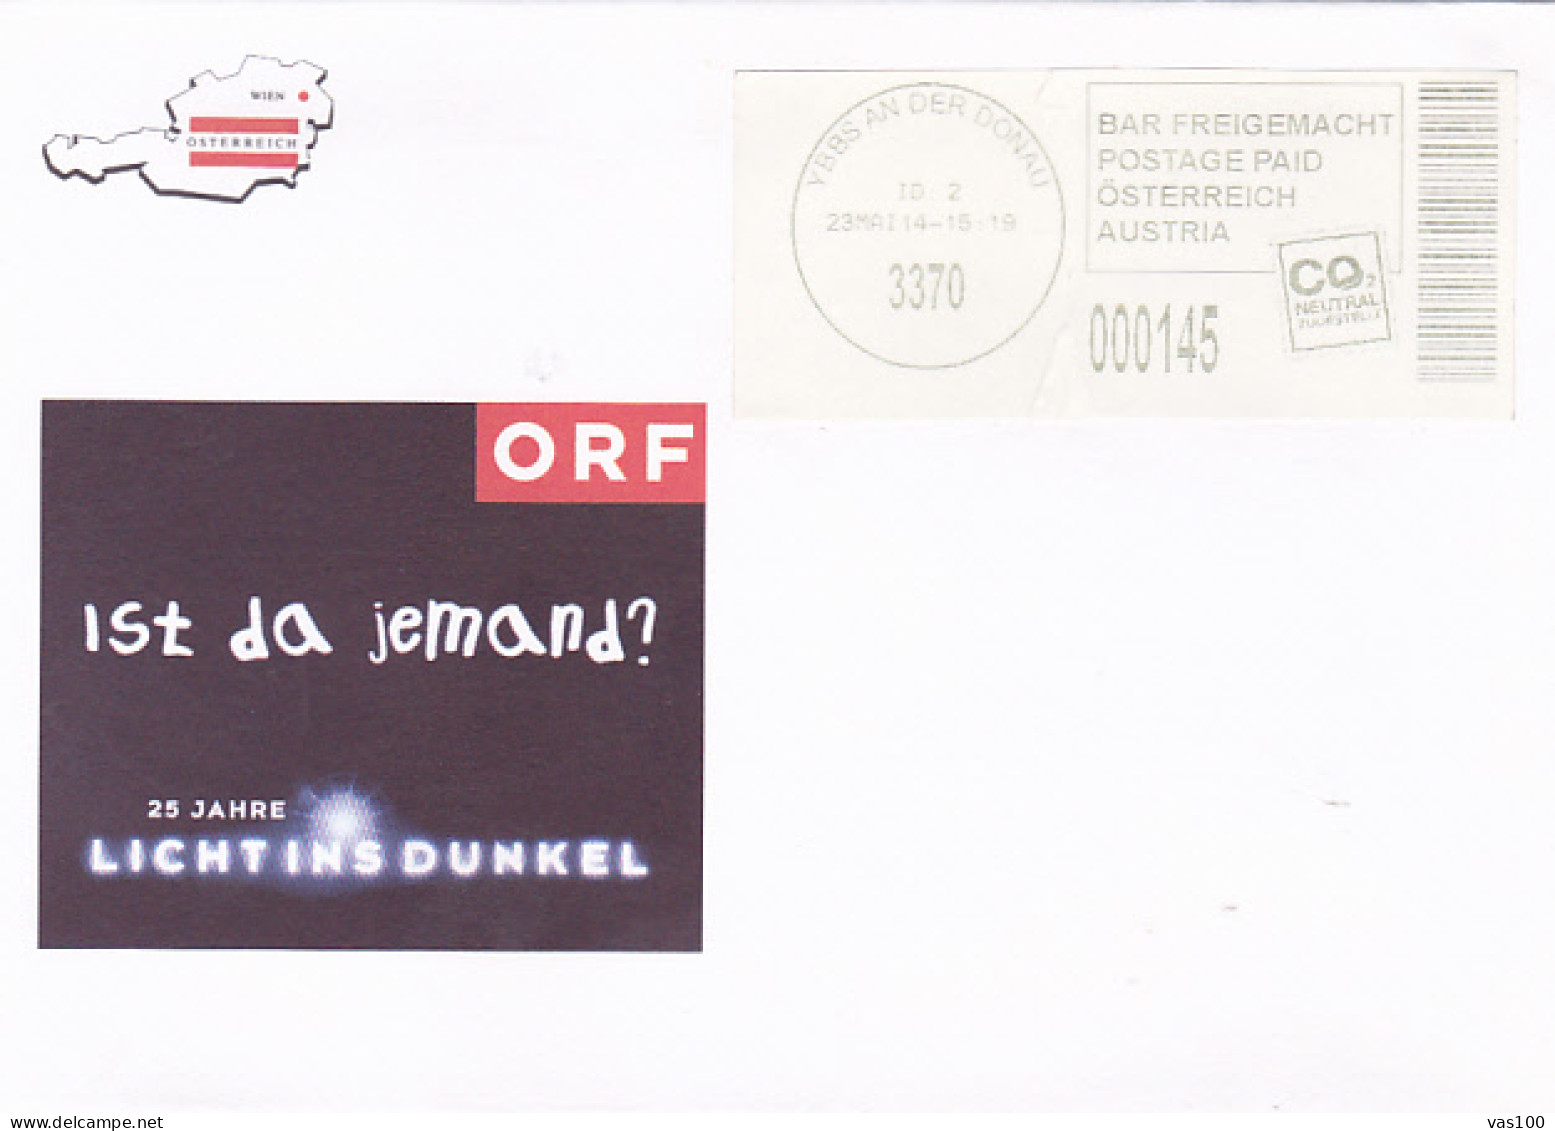 LIGHT IN THE DARK TELETHON ADVERTISING, POSTAGE PAID SPECIAL COVER, 2014, AUSTRIA - Briefe U. Dokumente